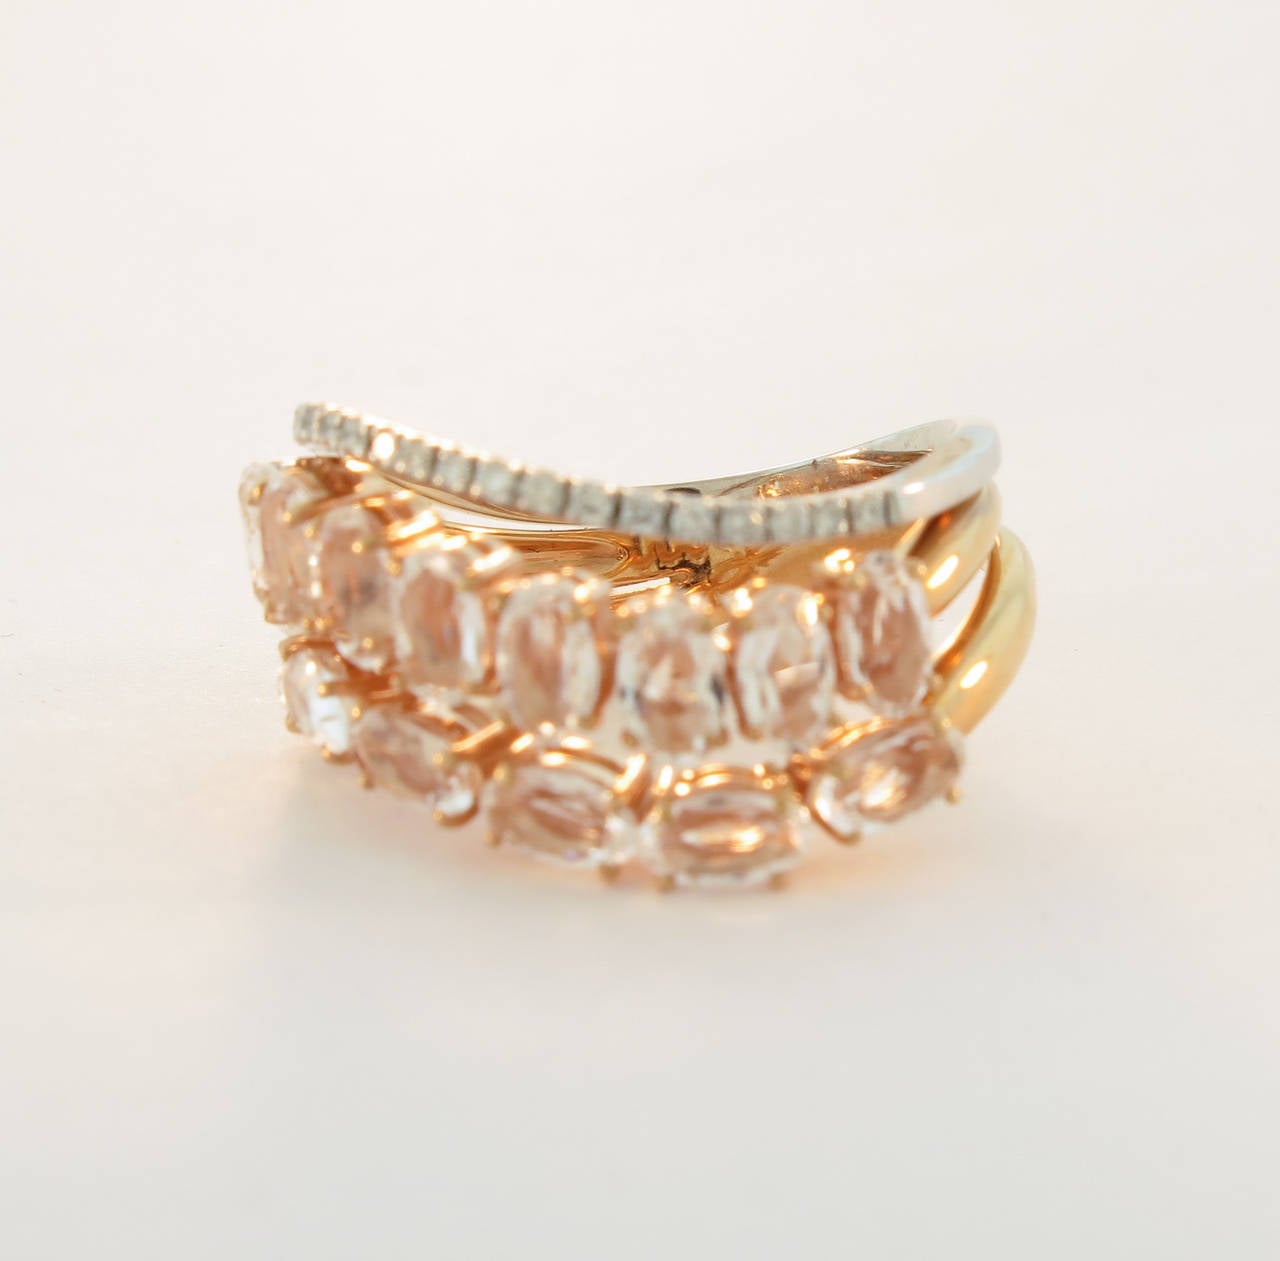 This 18K rose gold Ring features Diamonds and translucent oval rose Quartz, arranged in a beautiful soft wave design.